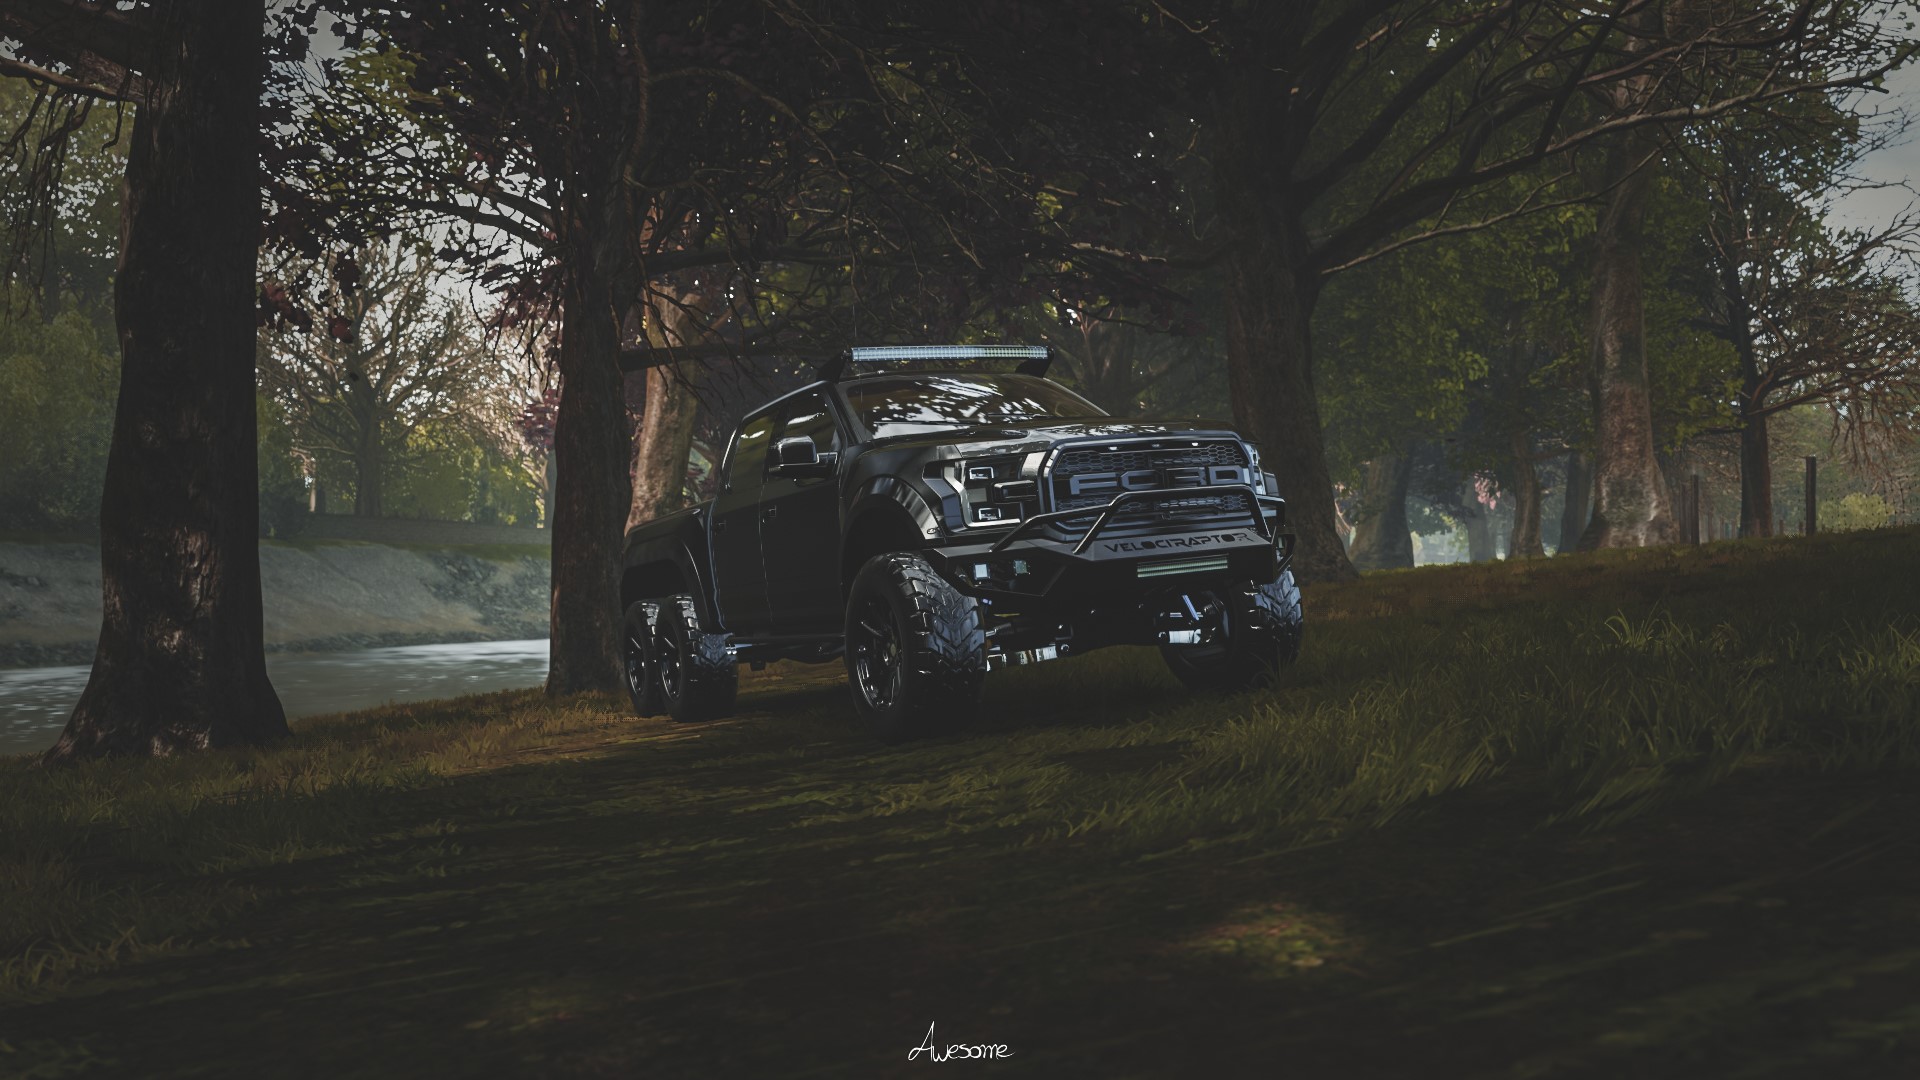 hennessey velociraptor 6x Hennessey, Forza, car, vehicle, video games, Ford Raptor, Ford, Forza Horizon 4. Mocah HD Wallpaper